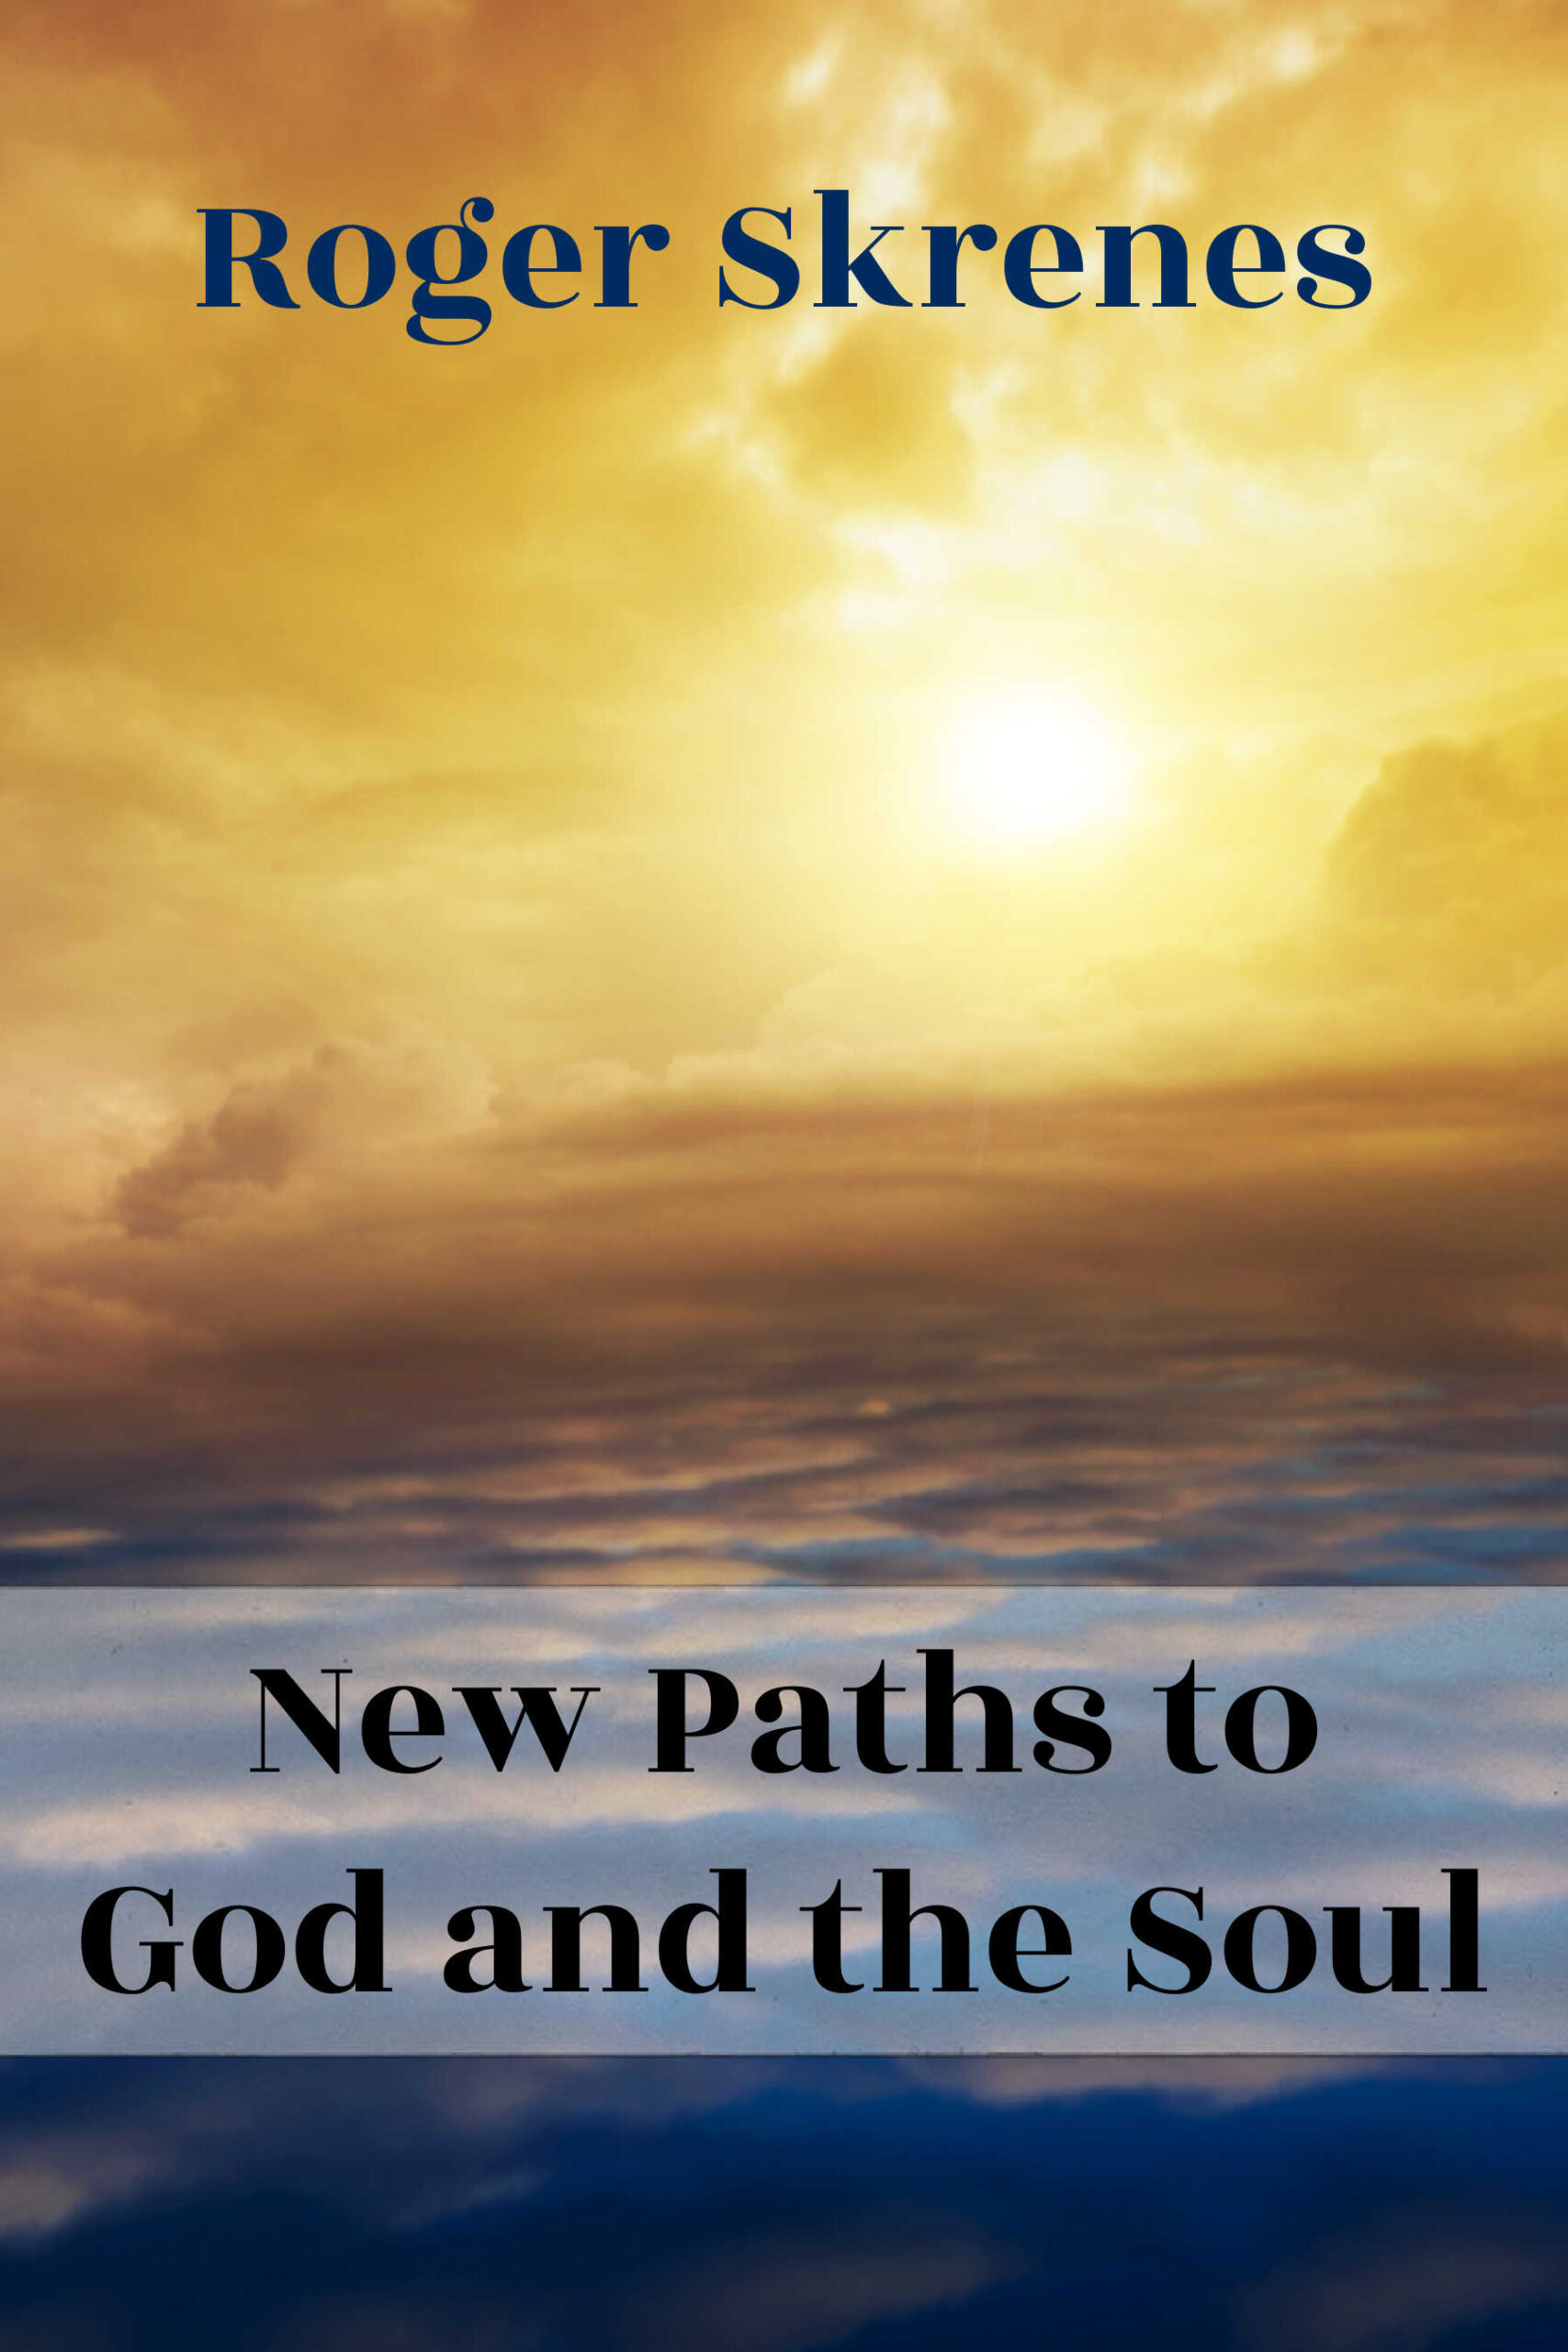 New Paths to God and the Soul by Roger Skrenes